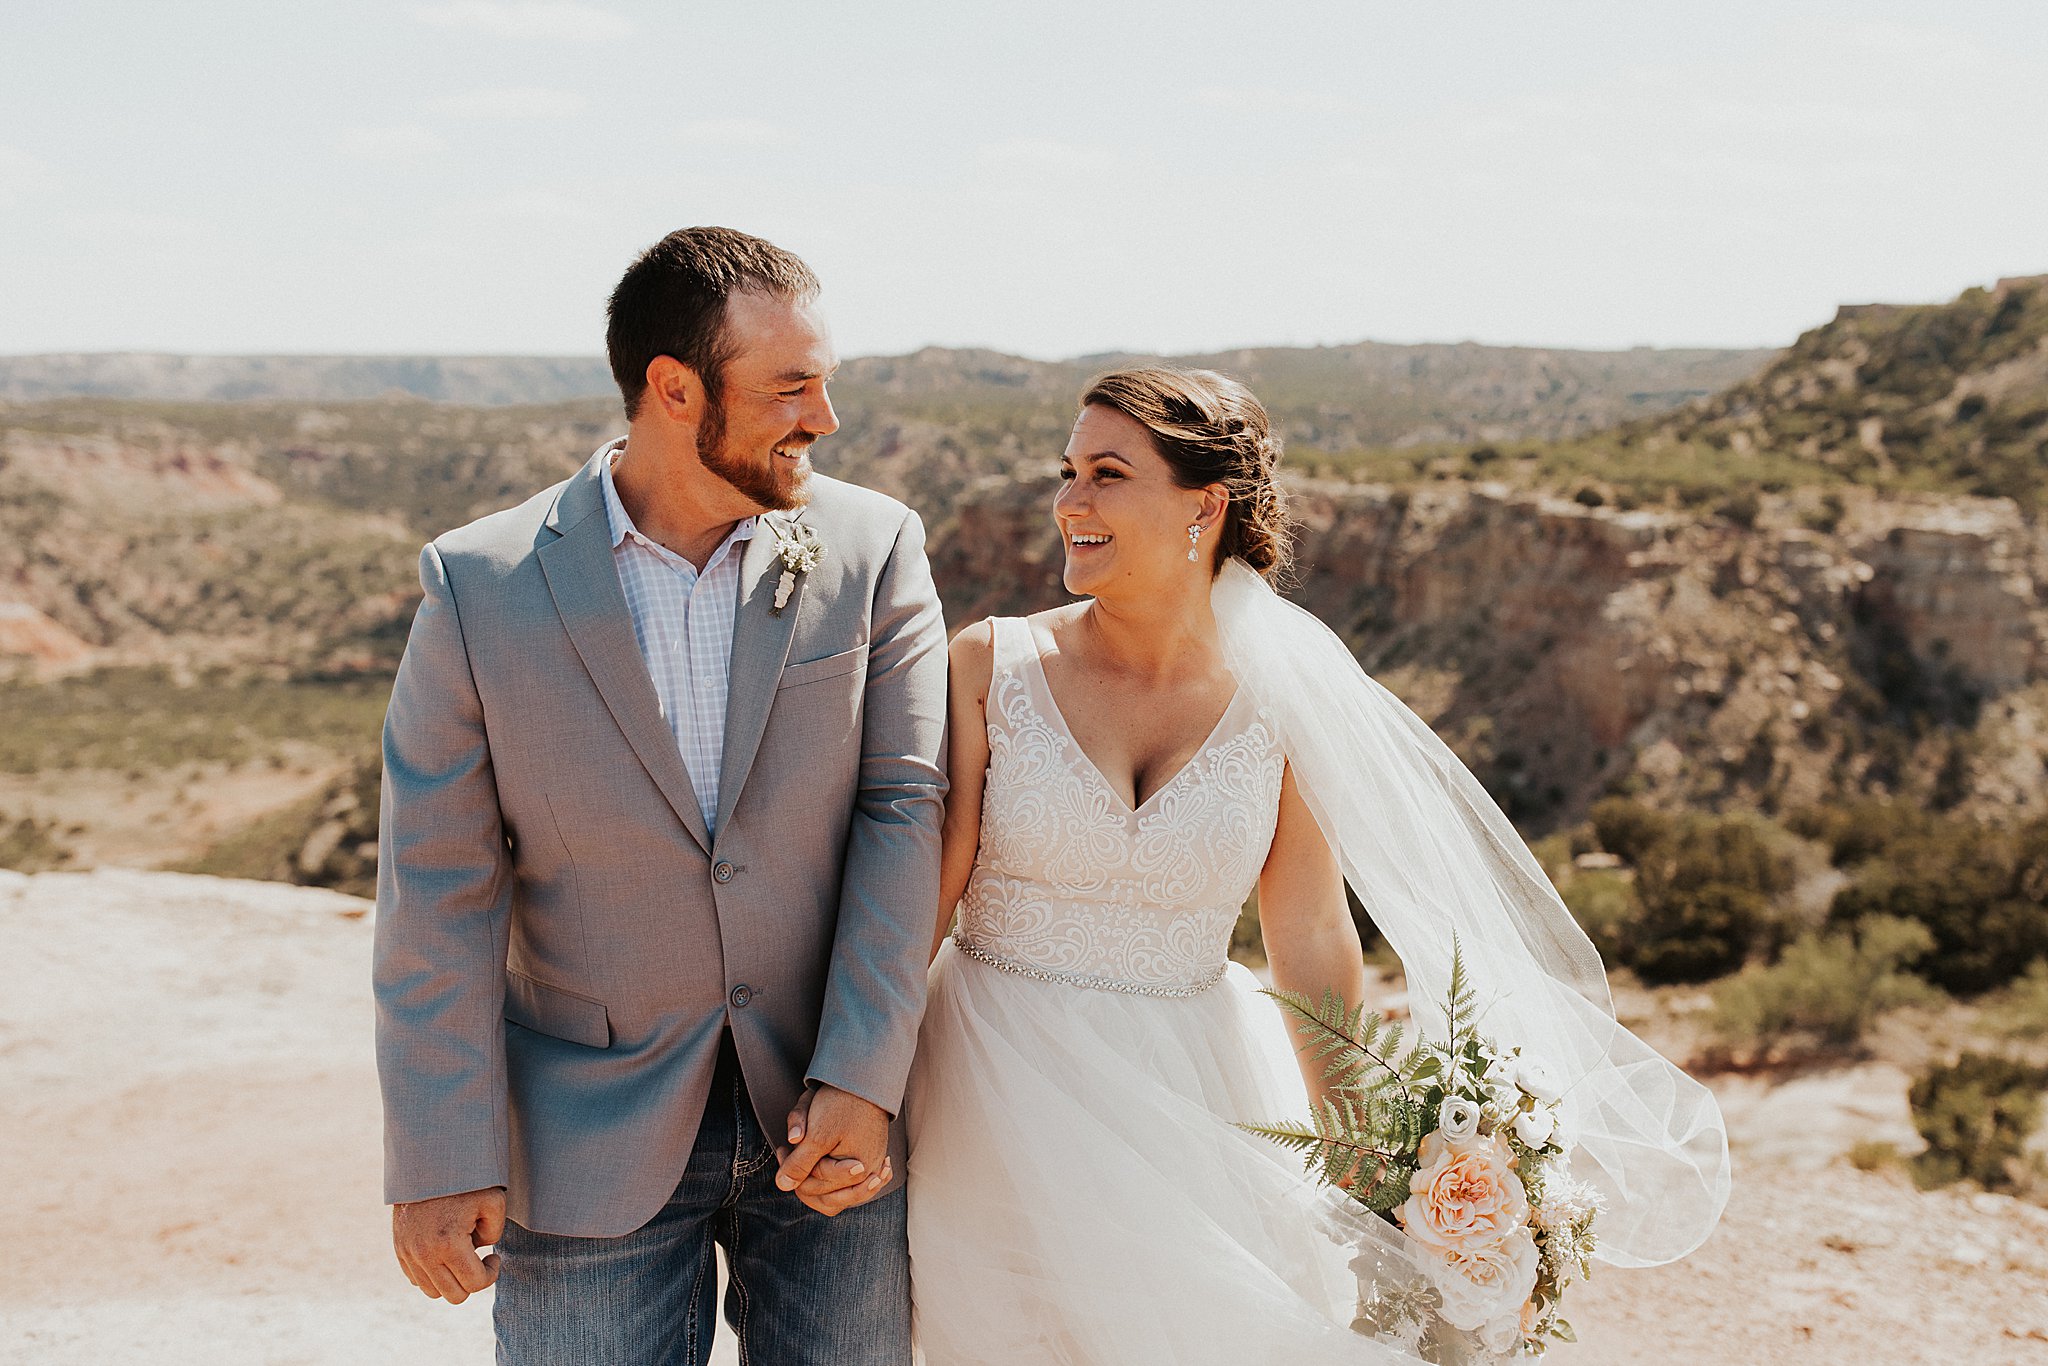 Bride and groom photo at their Palo Duro Canyon wedding.